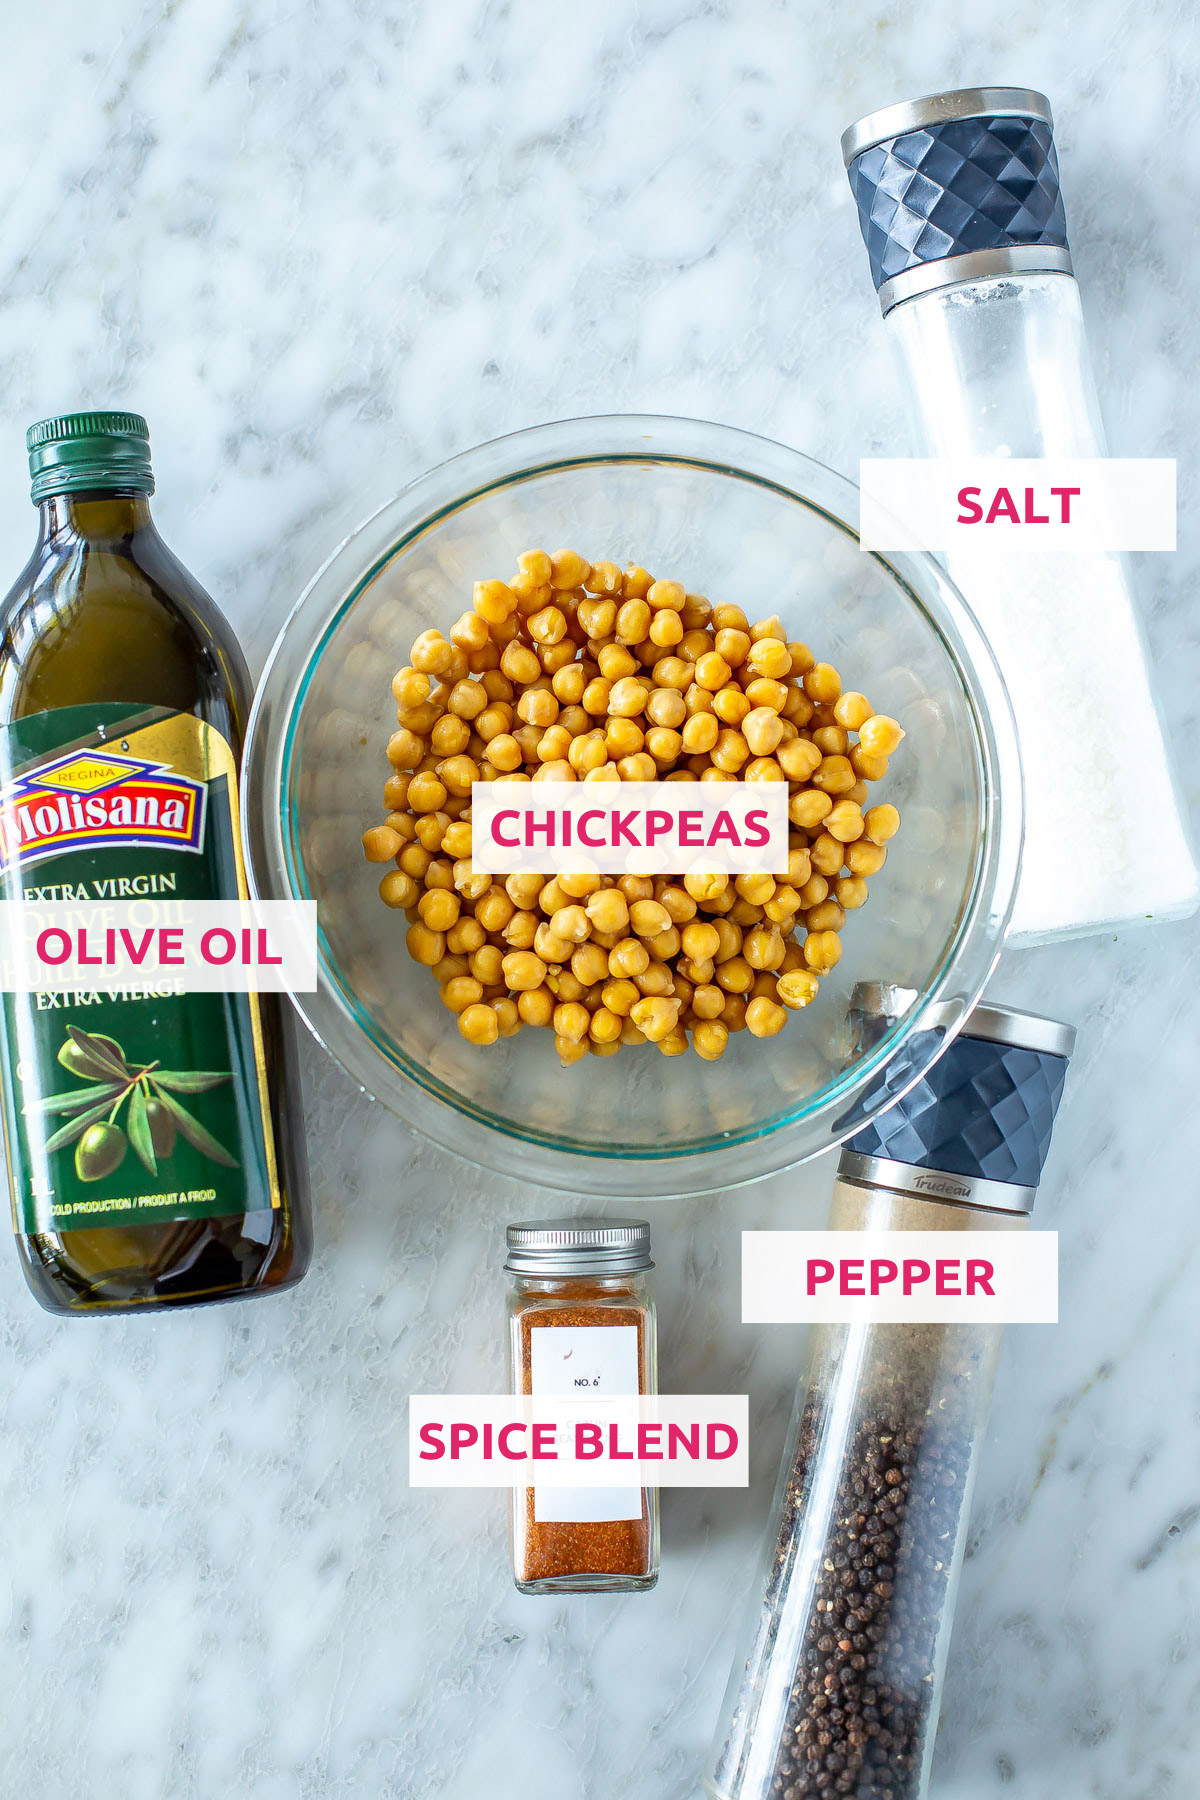 Ingredients for air fryer chickpeas: chickpeas, olive oil, salt, pepper, and a spice blend.